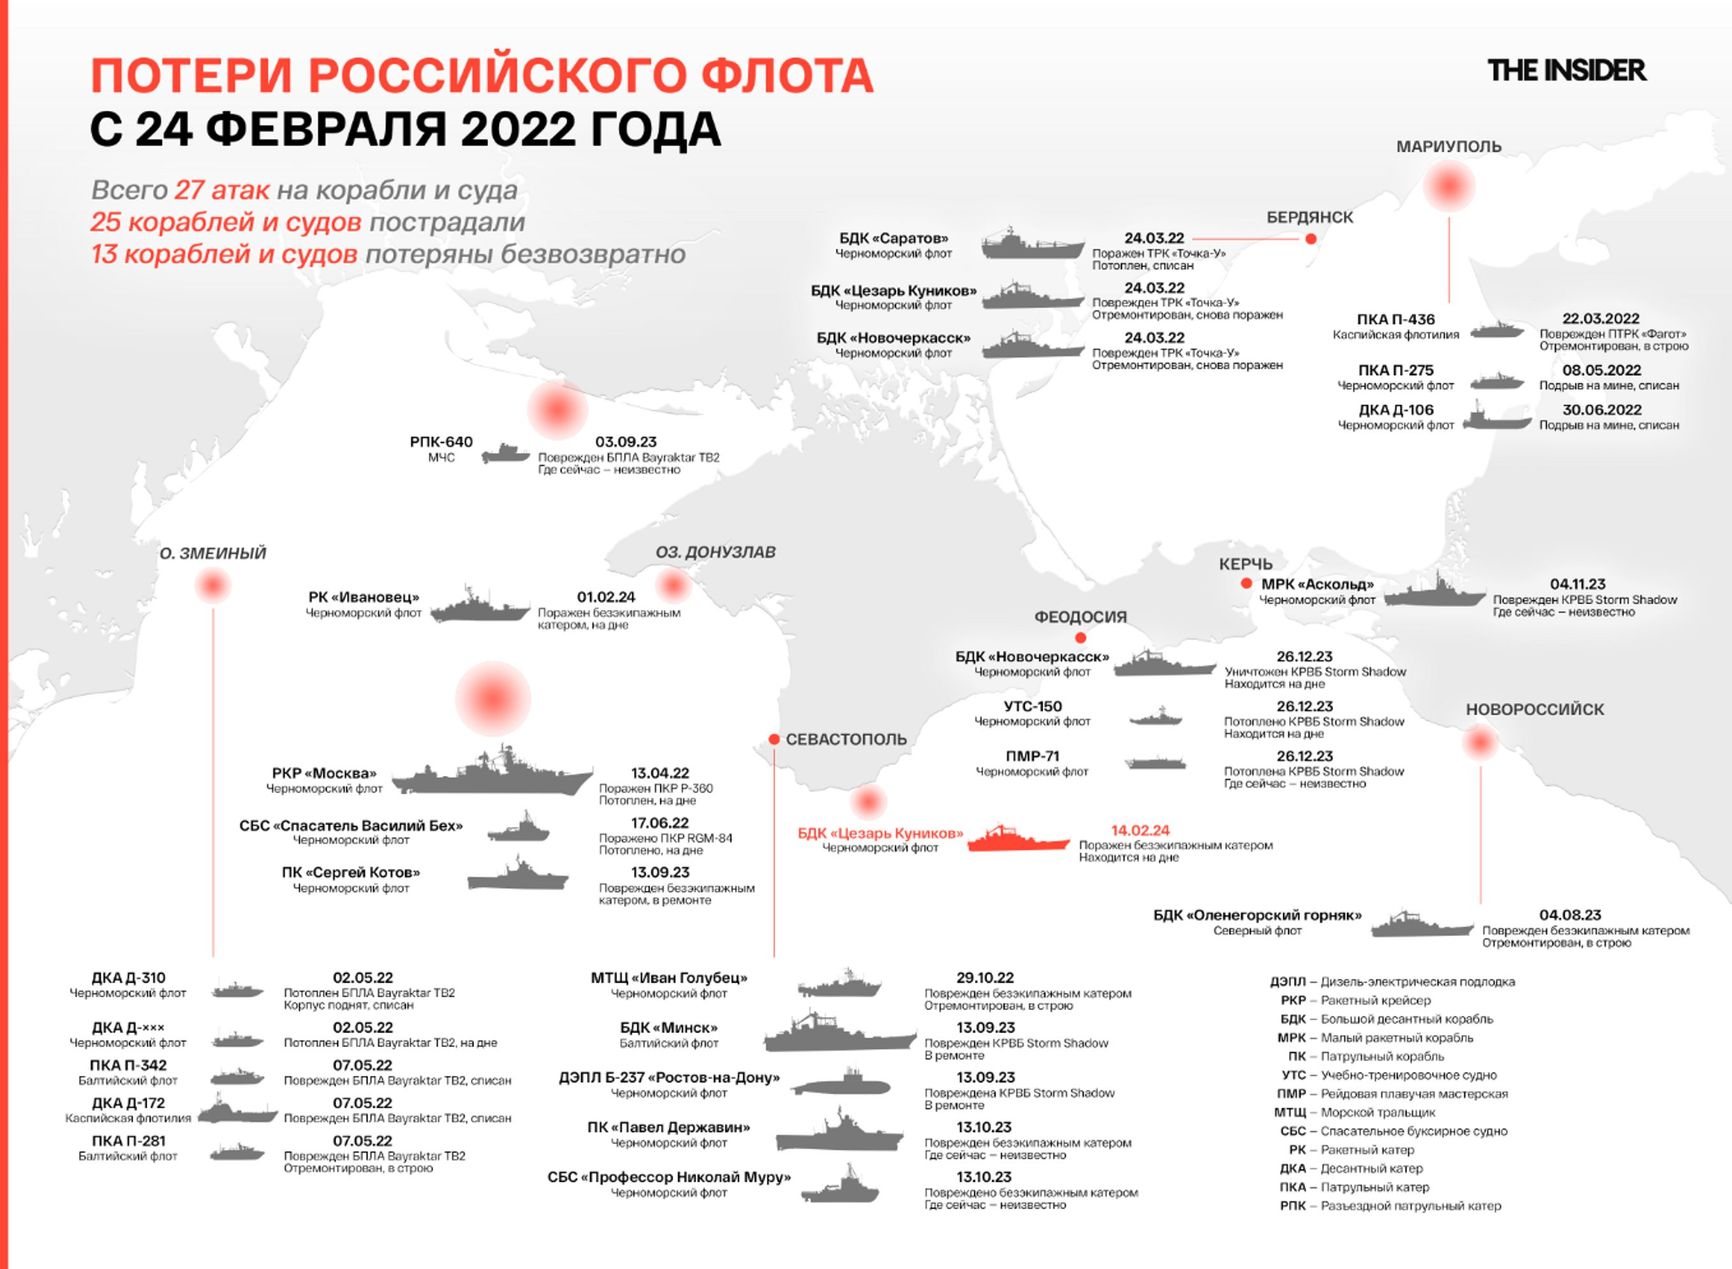 Losses of the Russian fleet since February 24, 2022